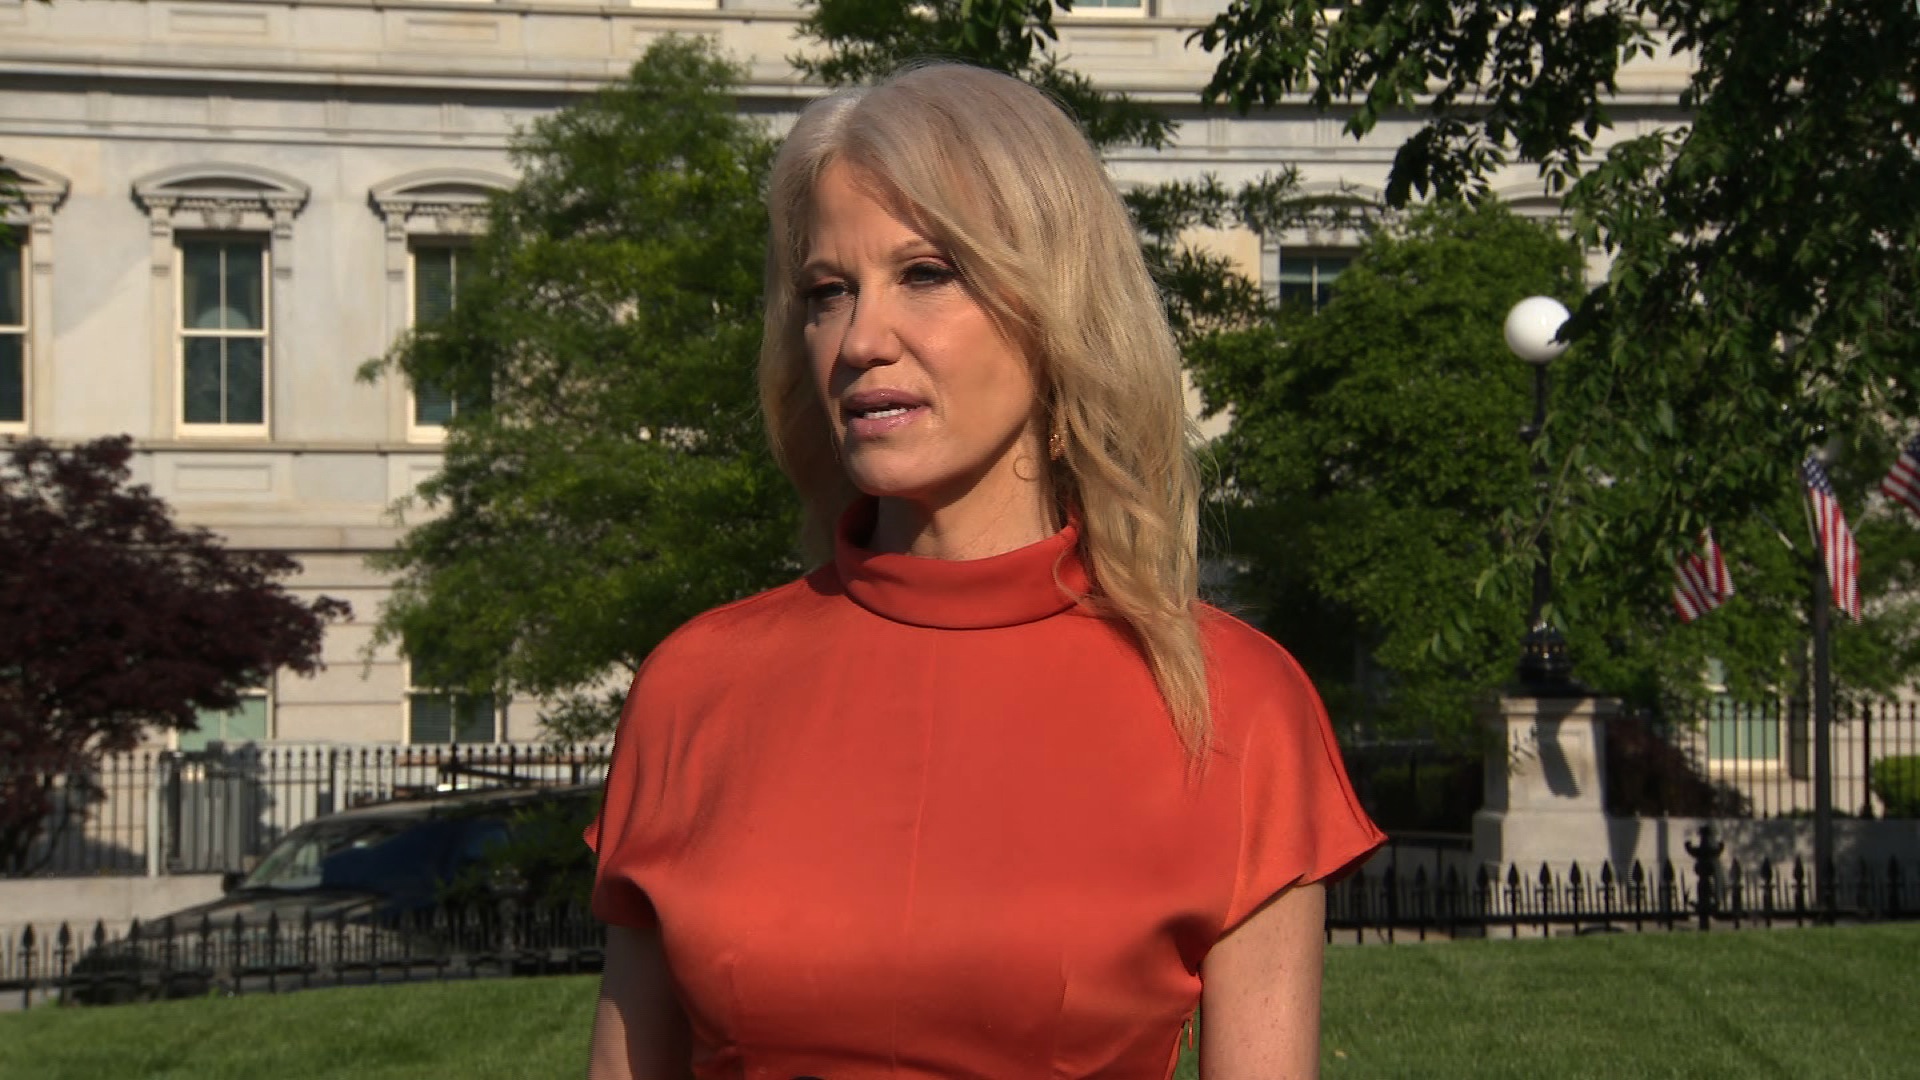 Trump adviser Kellyanne Conway speaks about what President Trump will discuss at an event in the Rose Garden on May 15 in Washington.  